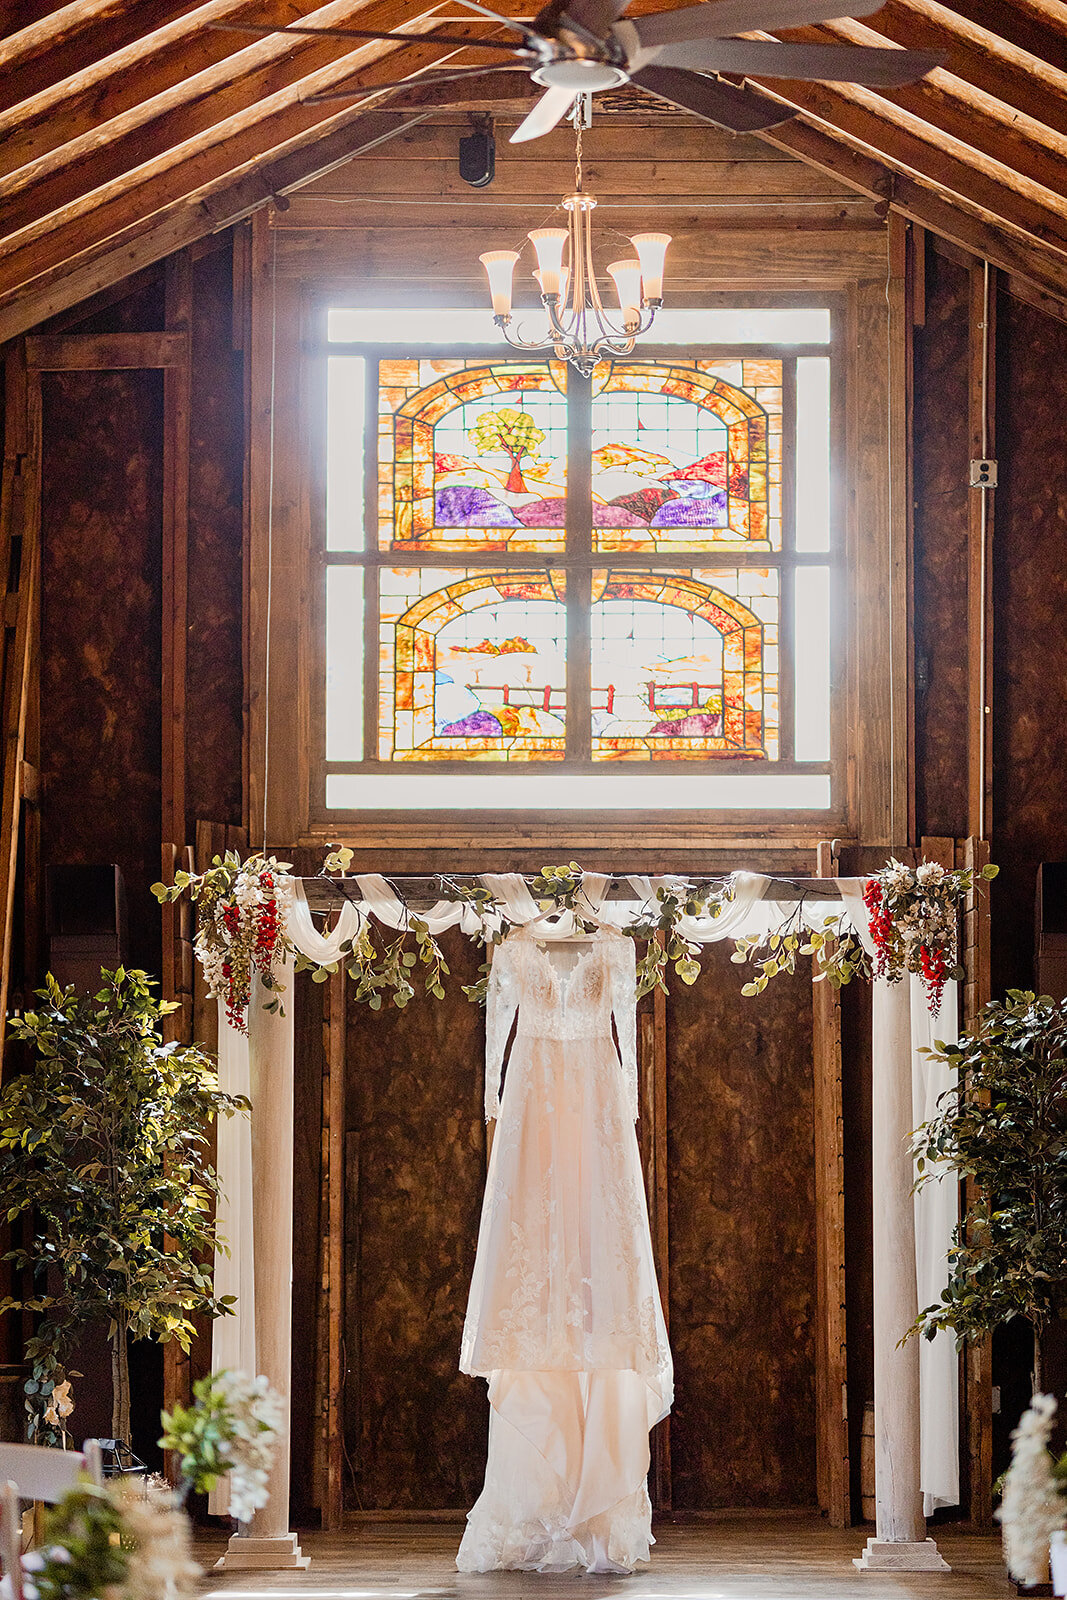 wedding dress hanging from the alter